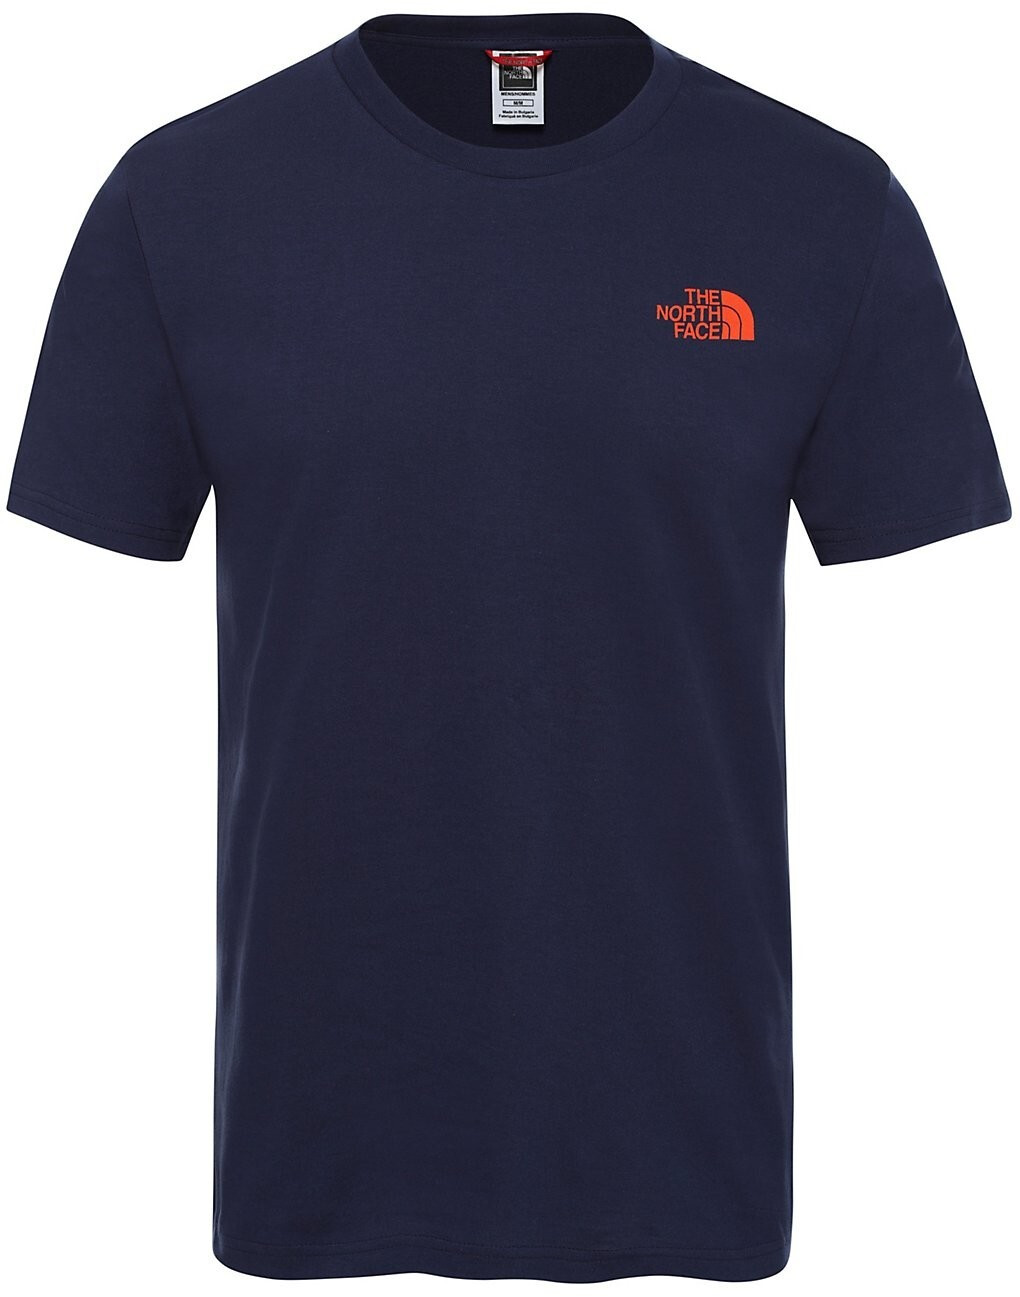 Buy The North Face Men's Simple T-Shirt (2TX5) from £13.99 (Today) – on idealo.co.uk